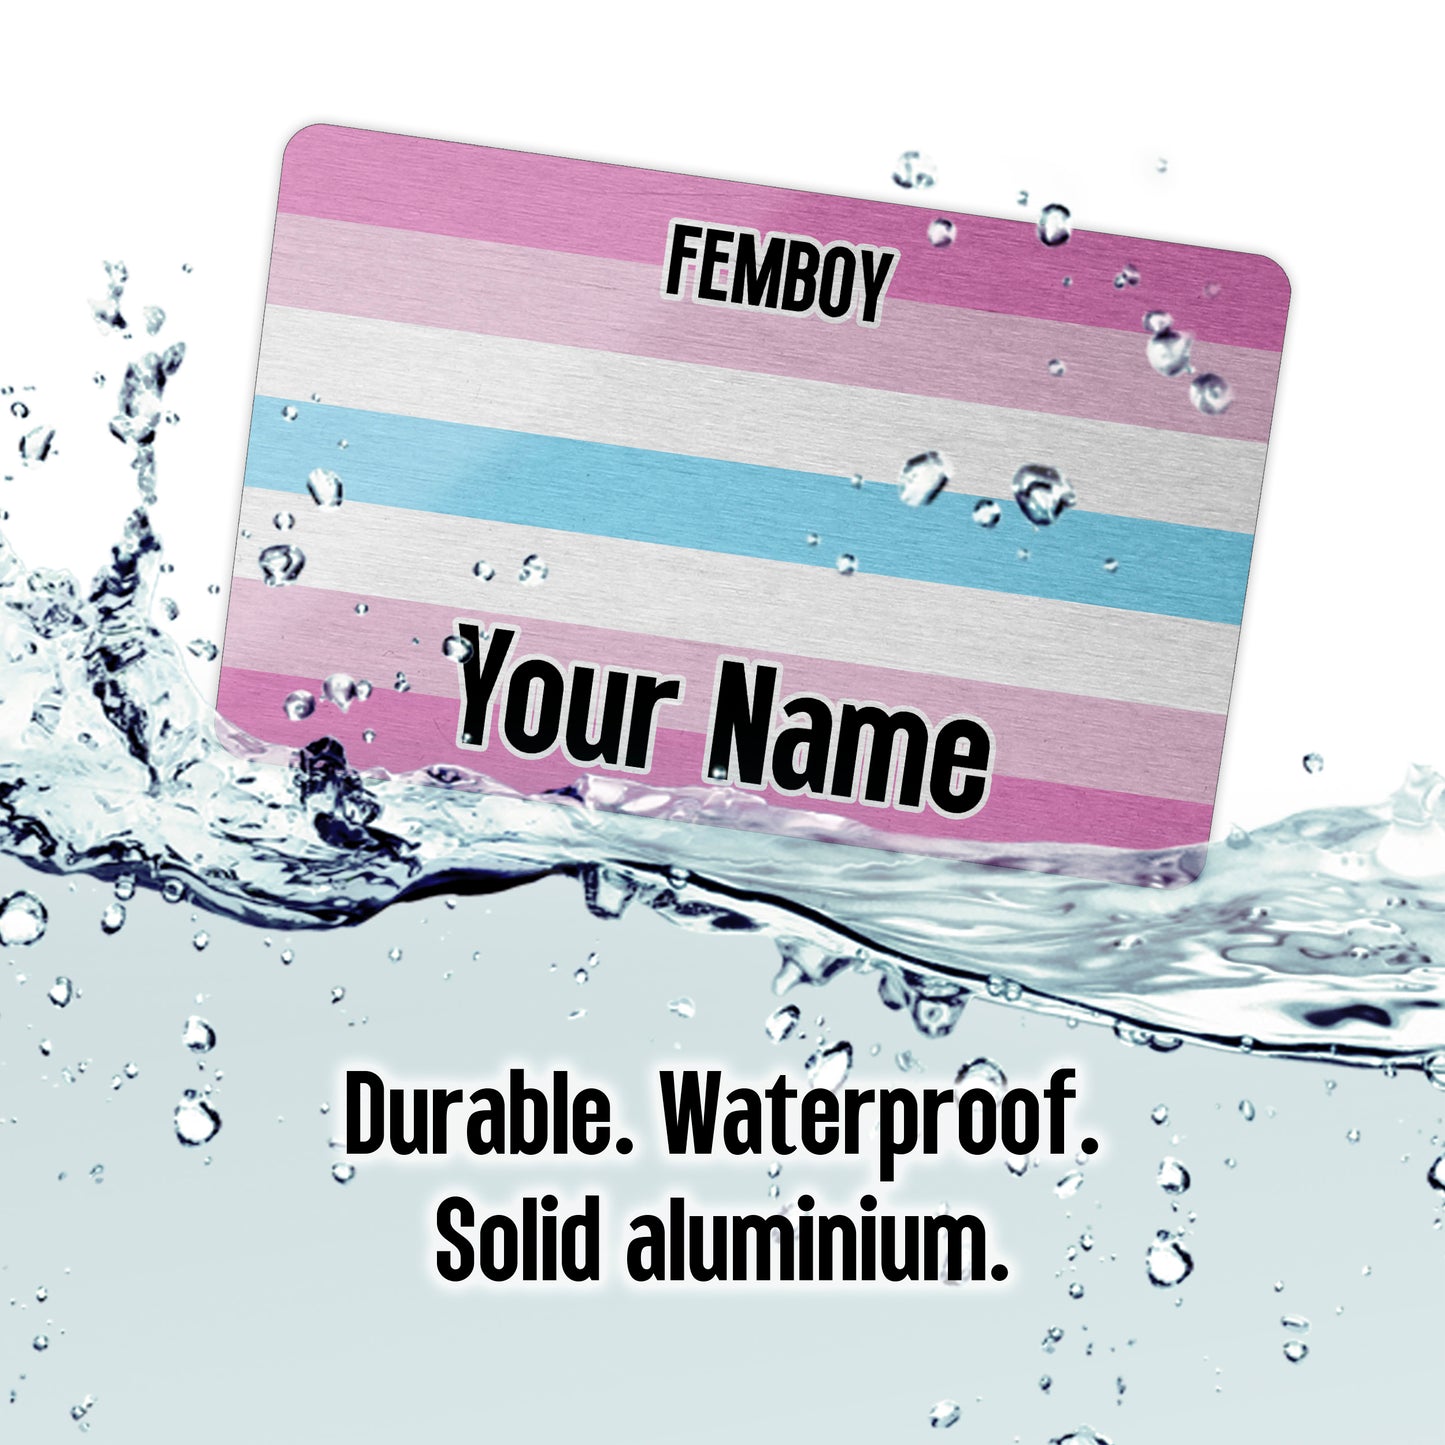 Aluminium wallet card personalised with your name and the femboy pride flag